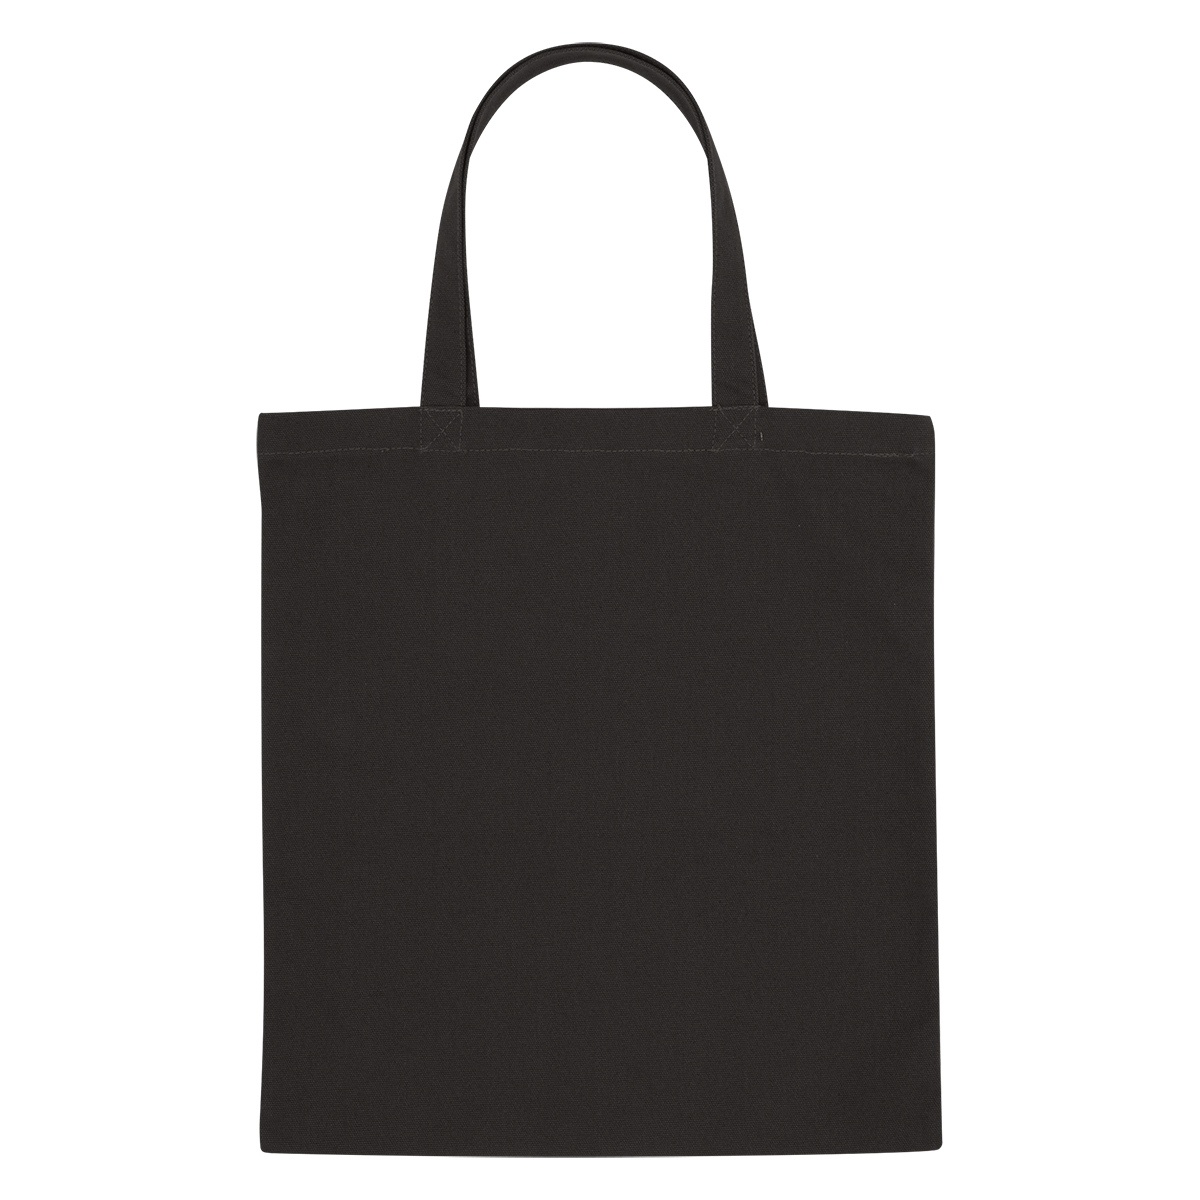 3767-theodore-tote-bag-hit-promotional-products